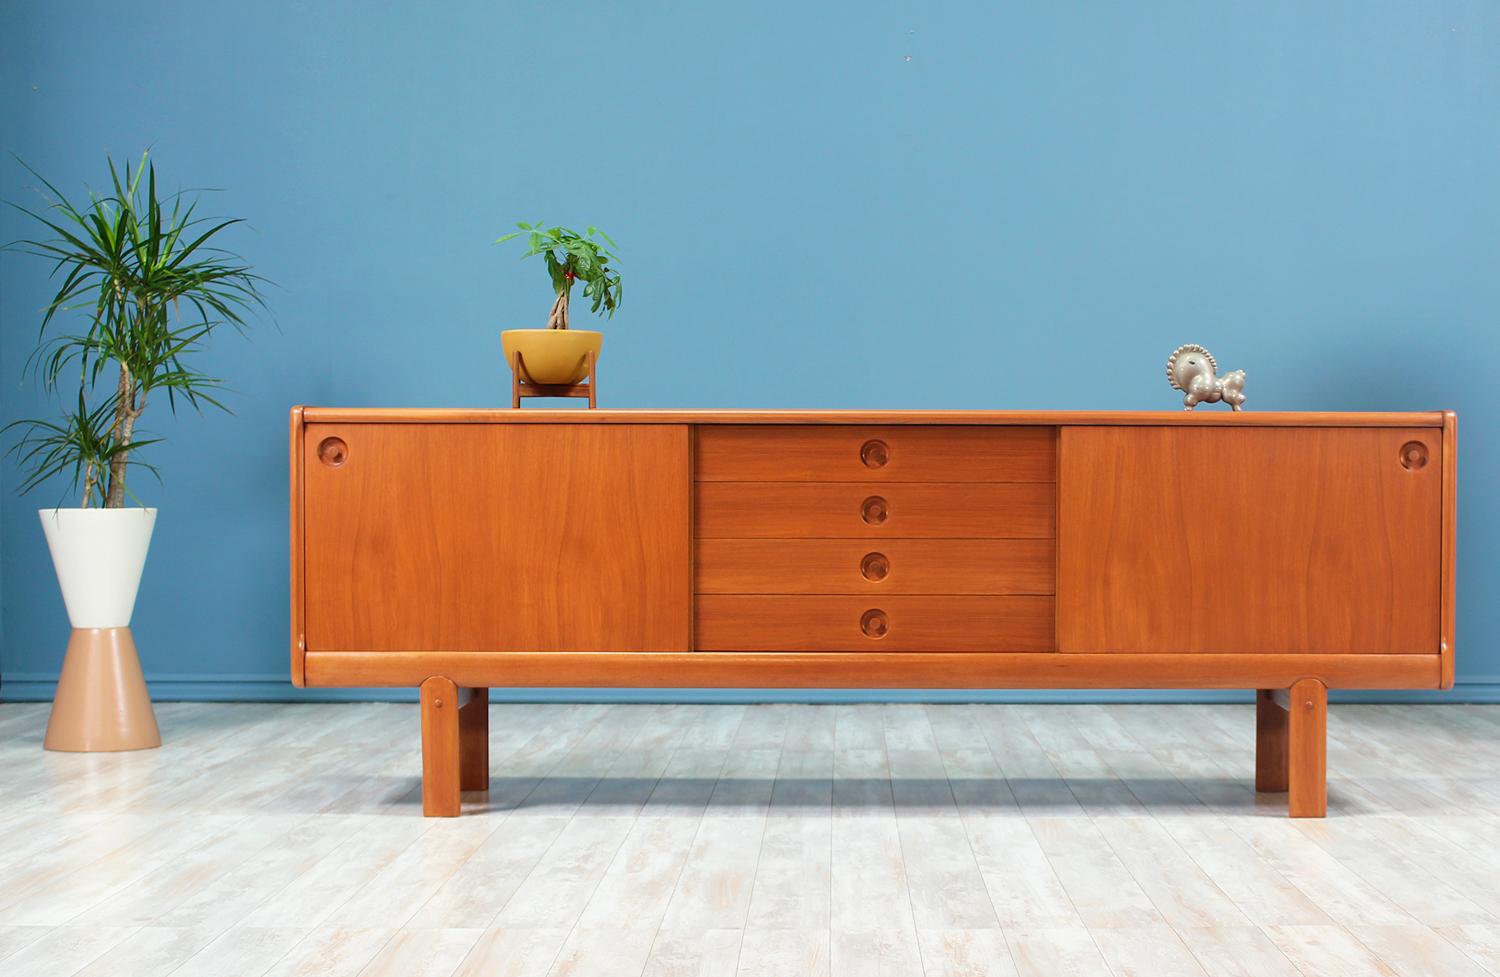 Beautiful credenza designed by H.W. Klein for Bramin Møbler in Denmark circa 1960’s. Impeccably crafted in teak wood, this spacious credenza offers four drawers in the middle and two sliding doors on each side with shelved compartments within. Each